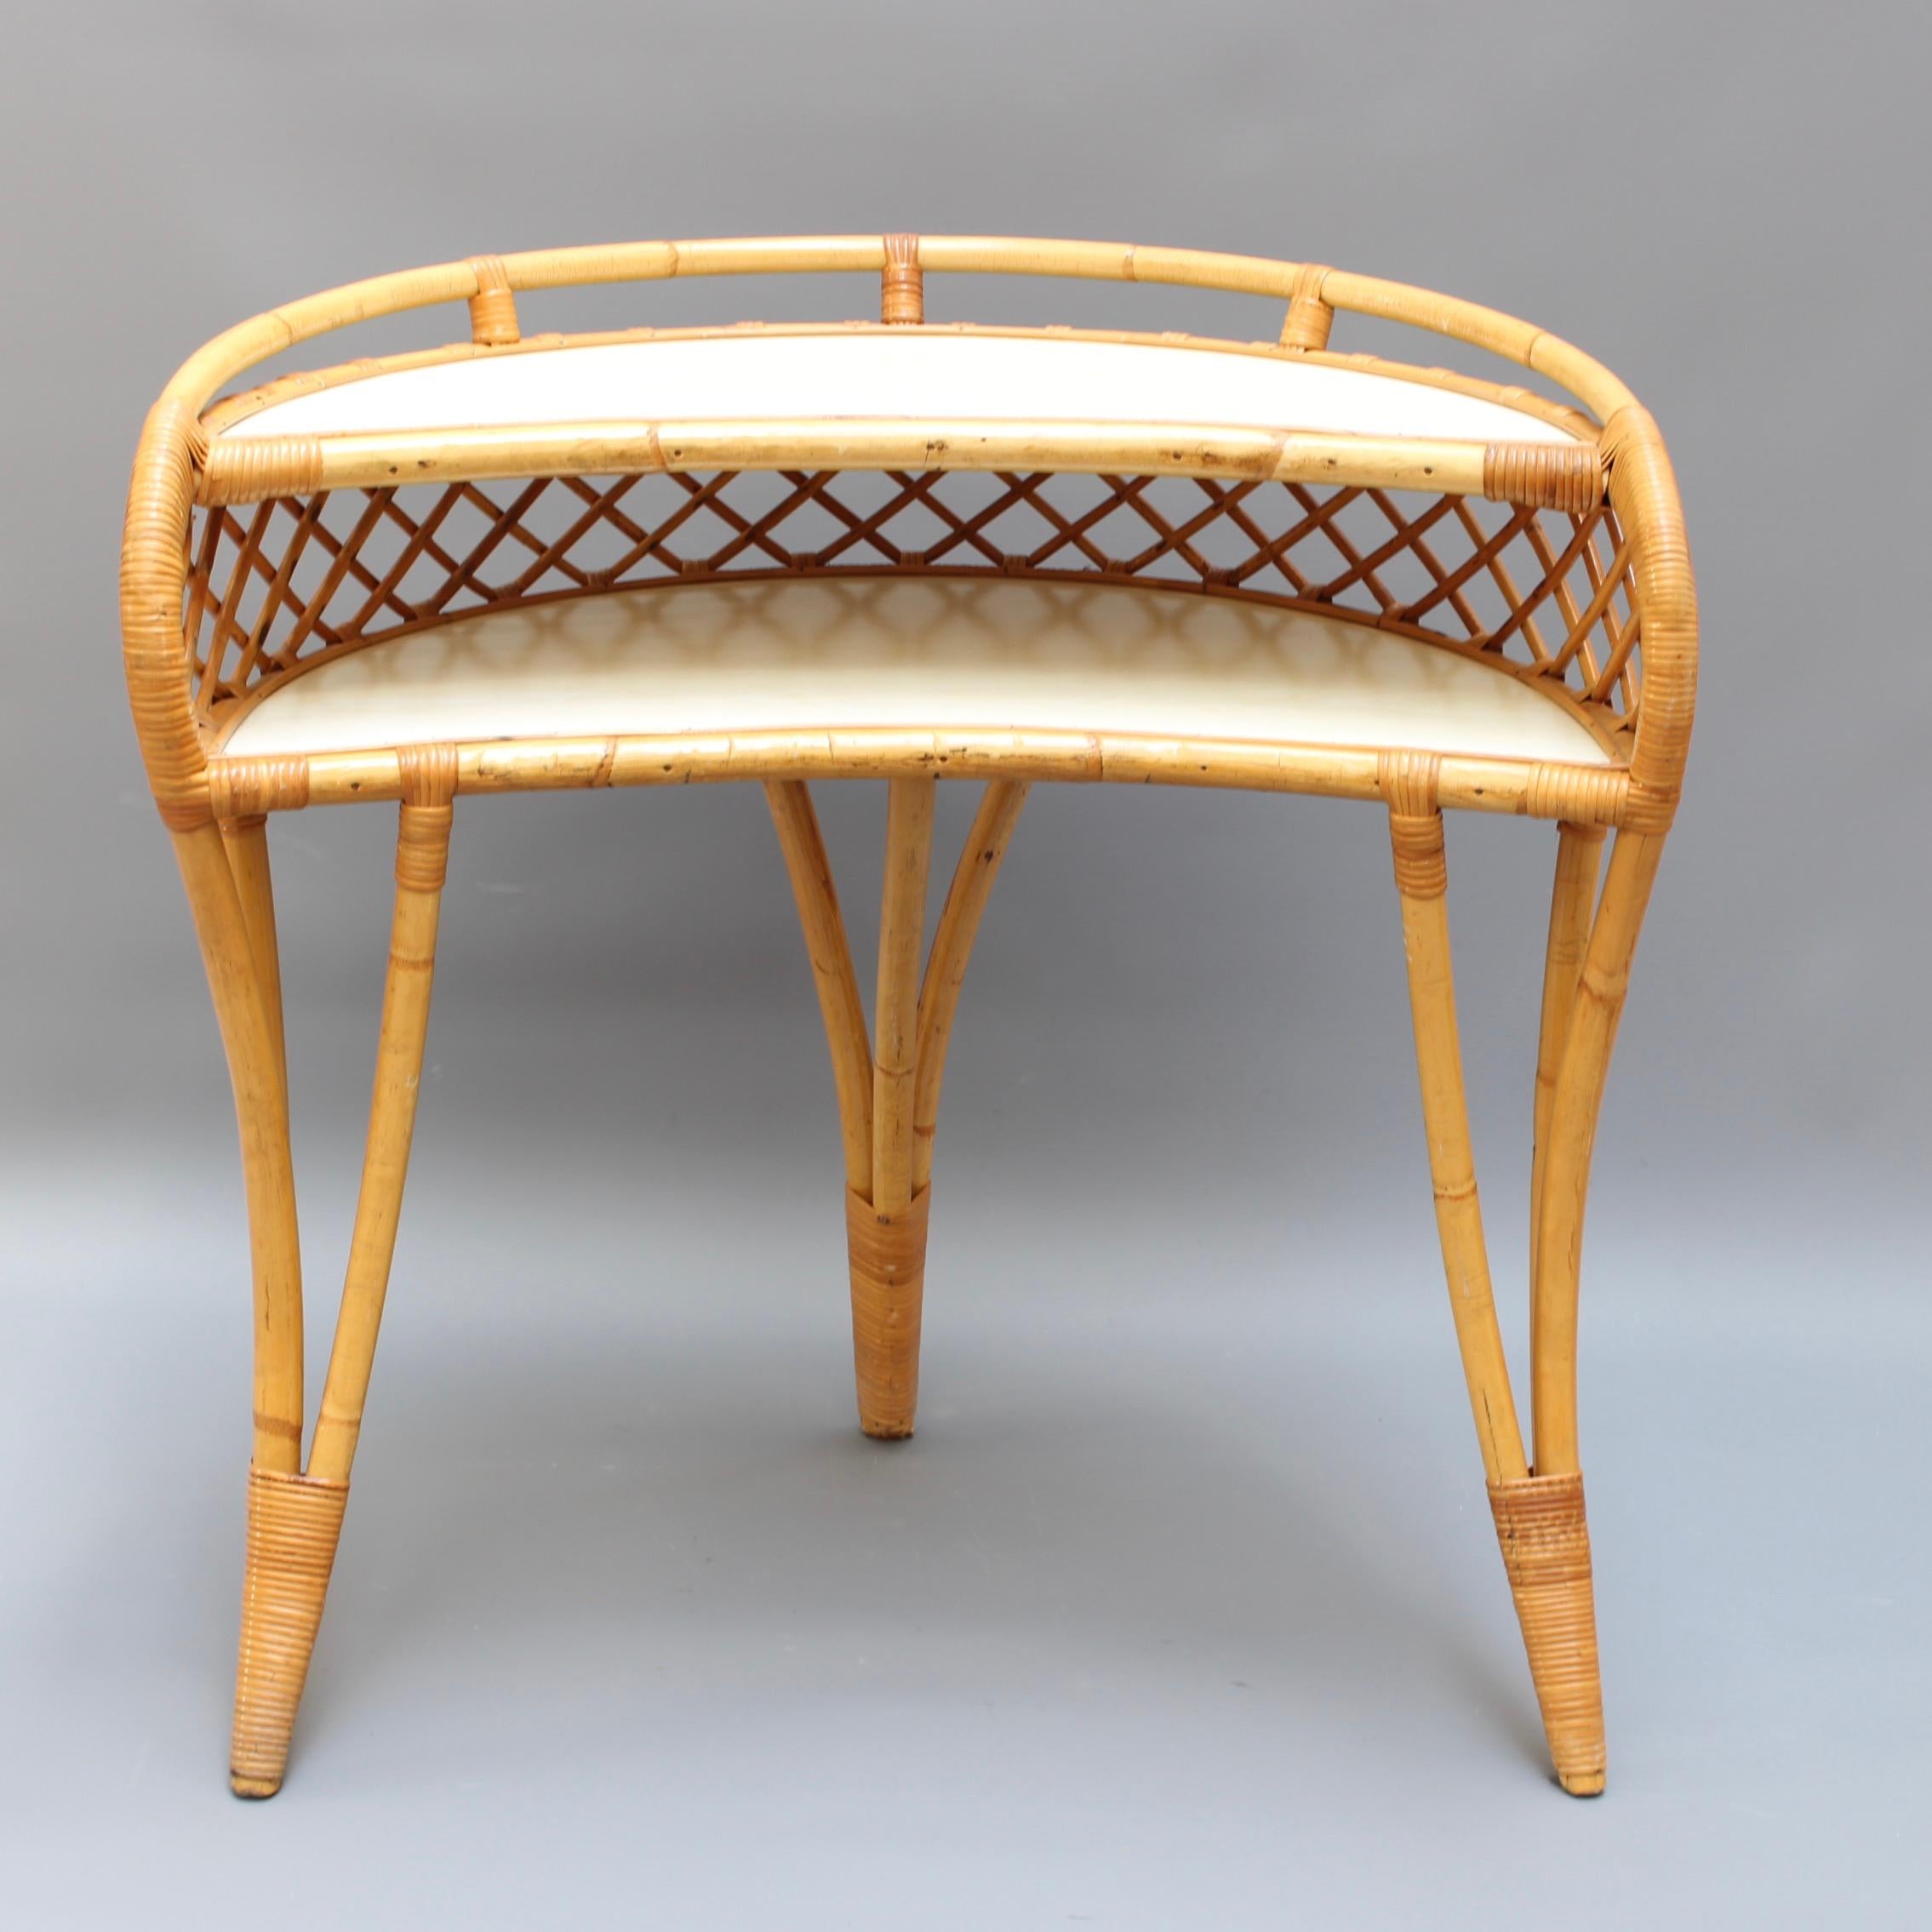 Midcentury Italian rattan desk or vanity table, (circa 1960s). An absolute charmer and stylish piece of the era. There are two horizontal surfaces with a stylishly curved frame and legs. The individual legs are formed from the confluence of three